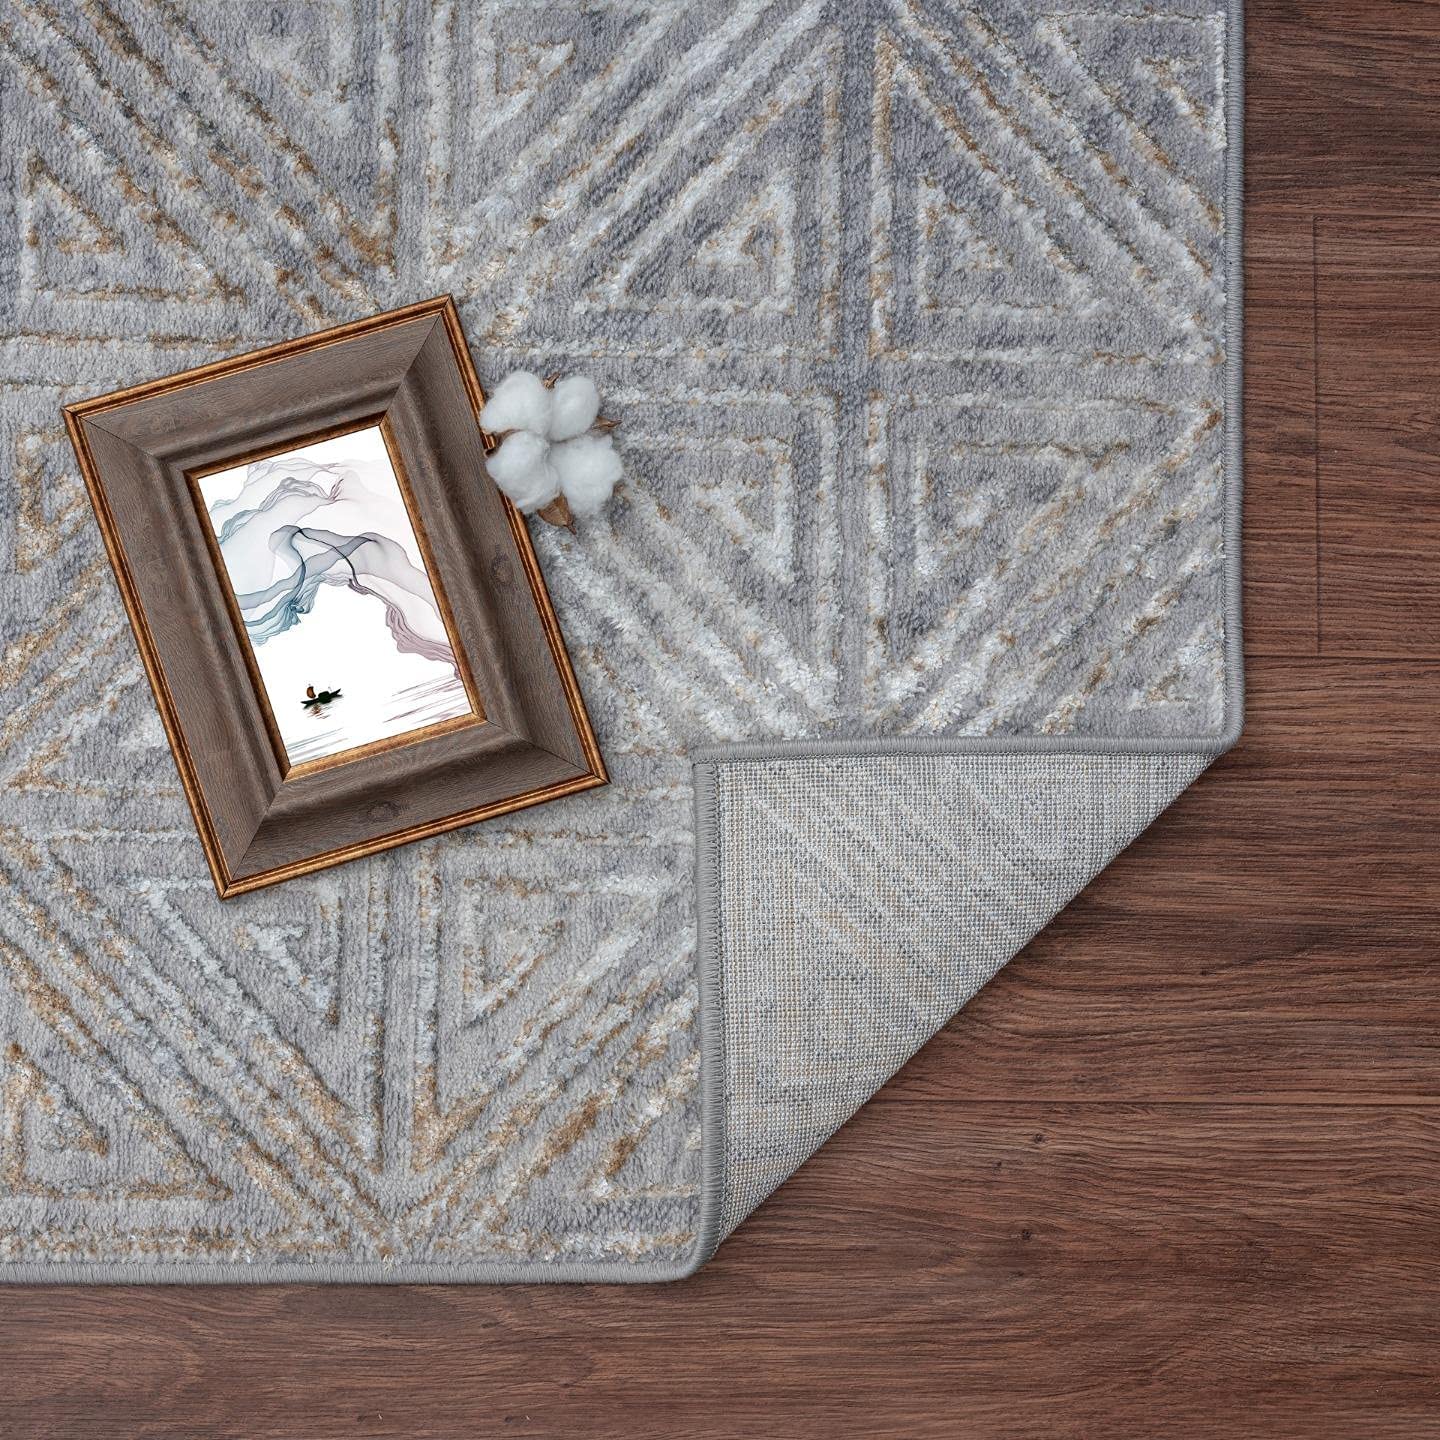 Florance Collection Gold Modern Geometric Soft Area Rug